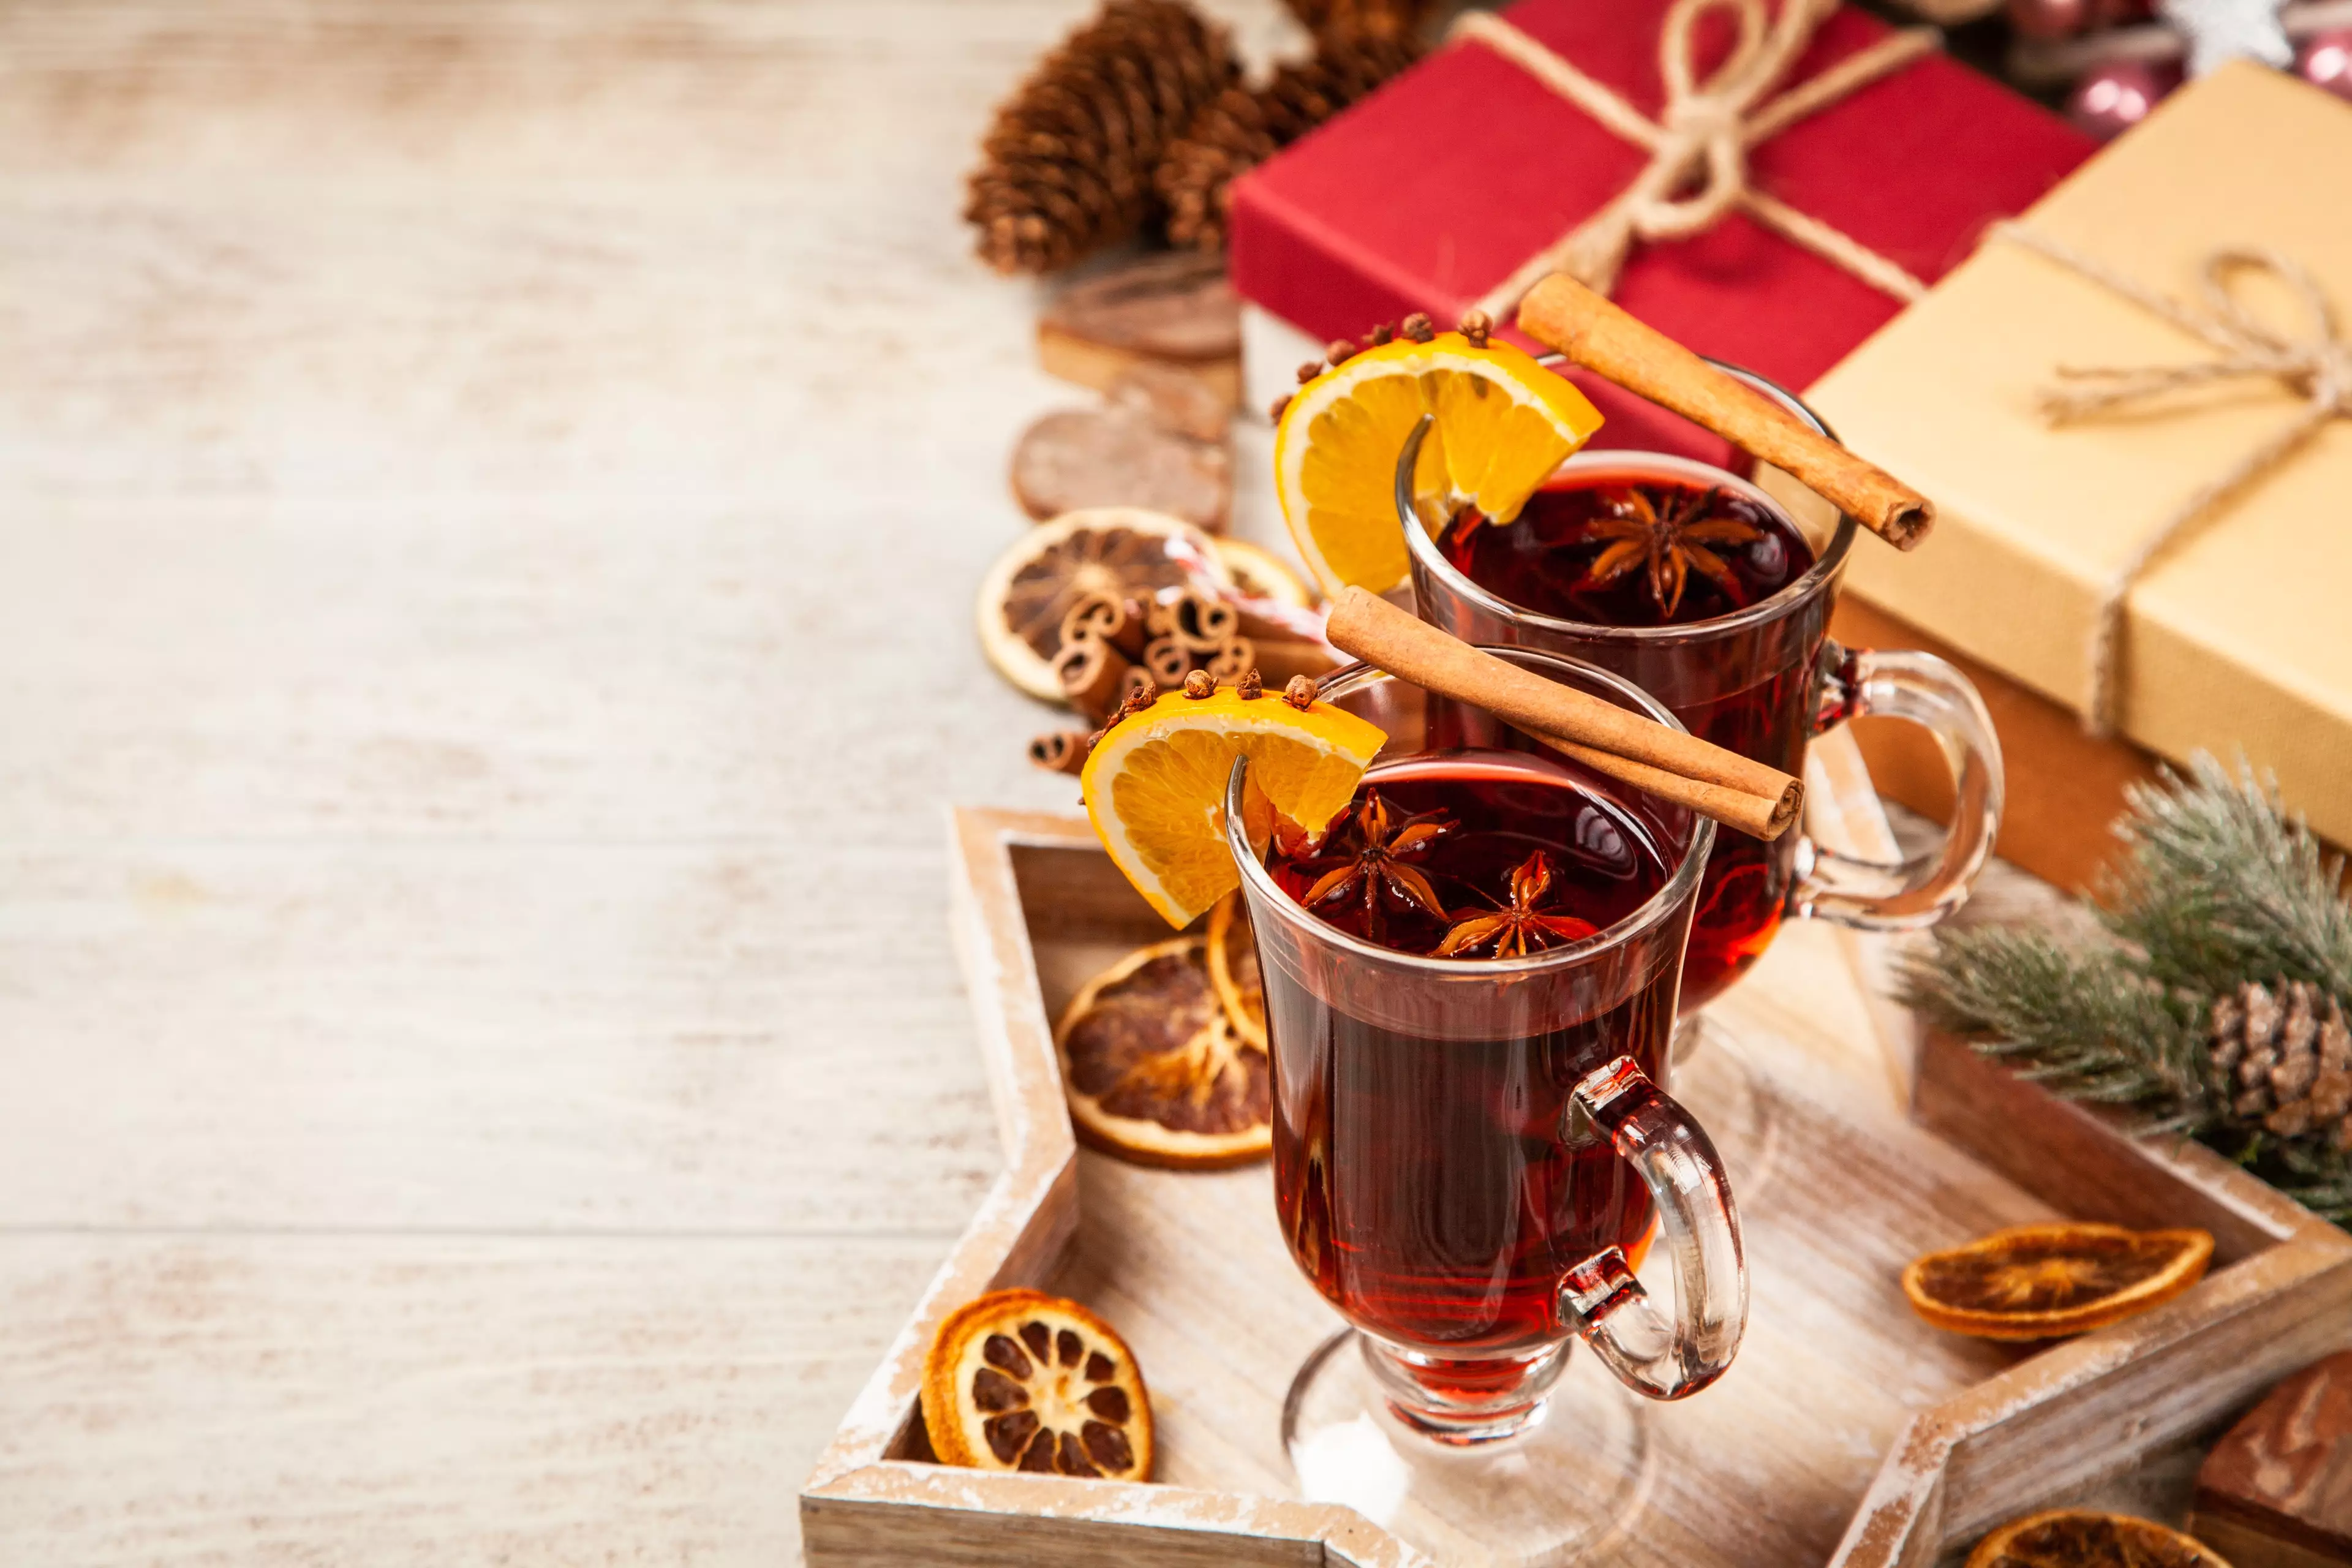 Crabbie's Mulled Ginger Wine sounds like the perfect Christmas tipple. (